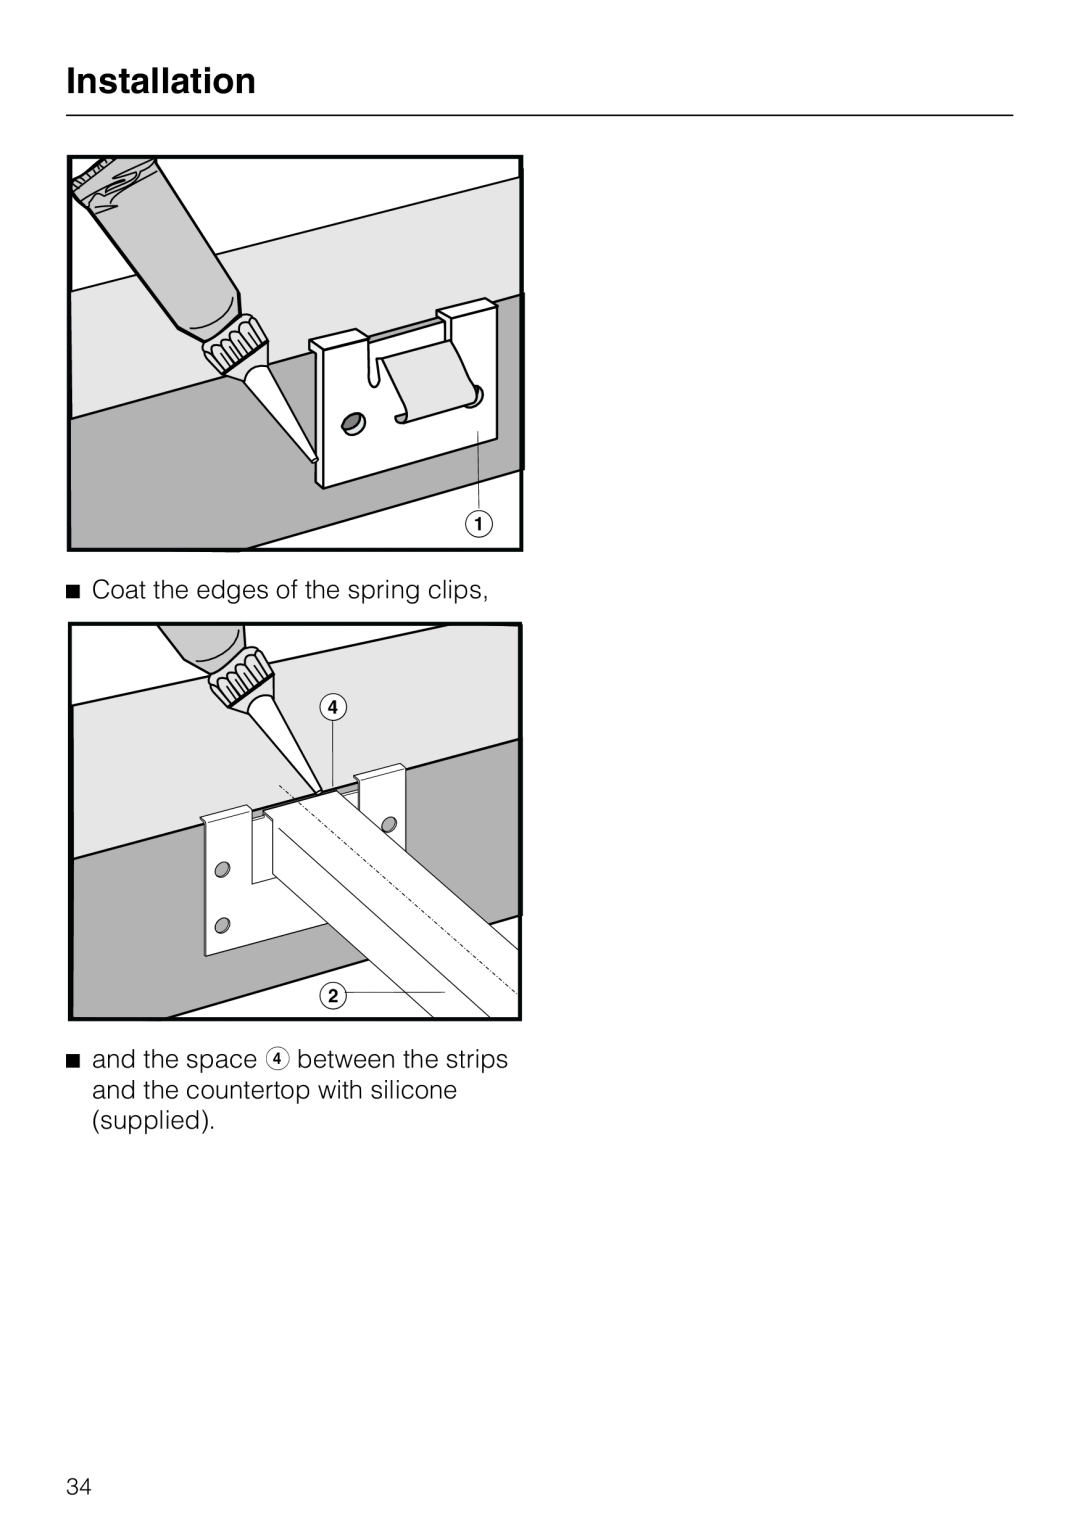 Miele CS1012 installation instructions Installation, Coat the edges of the spring clips 